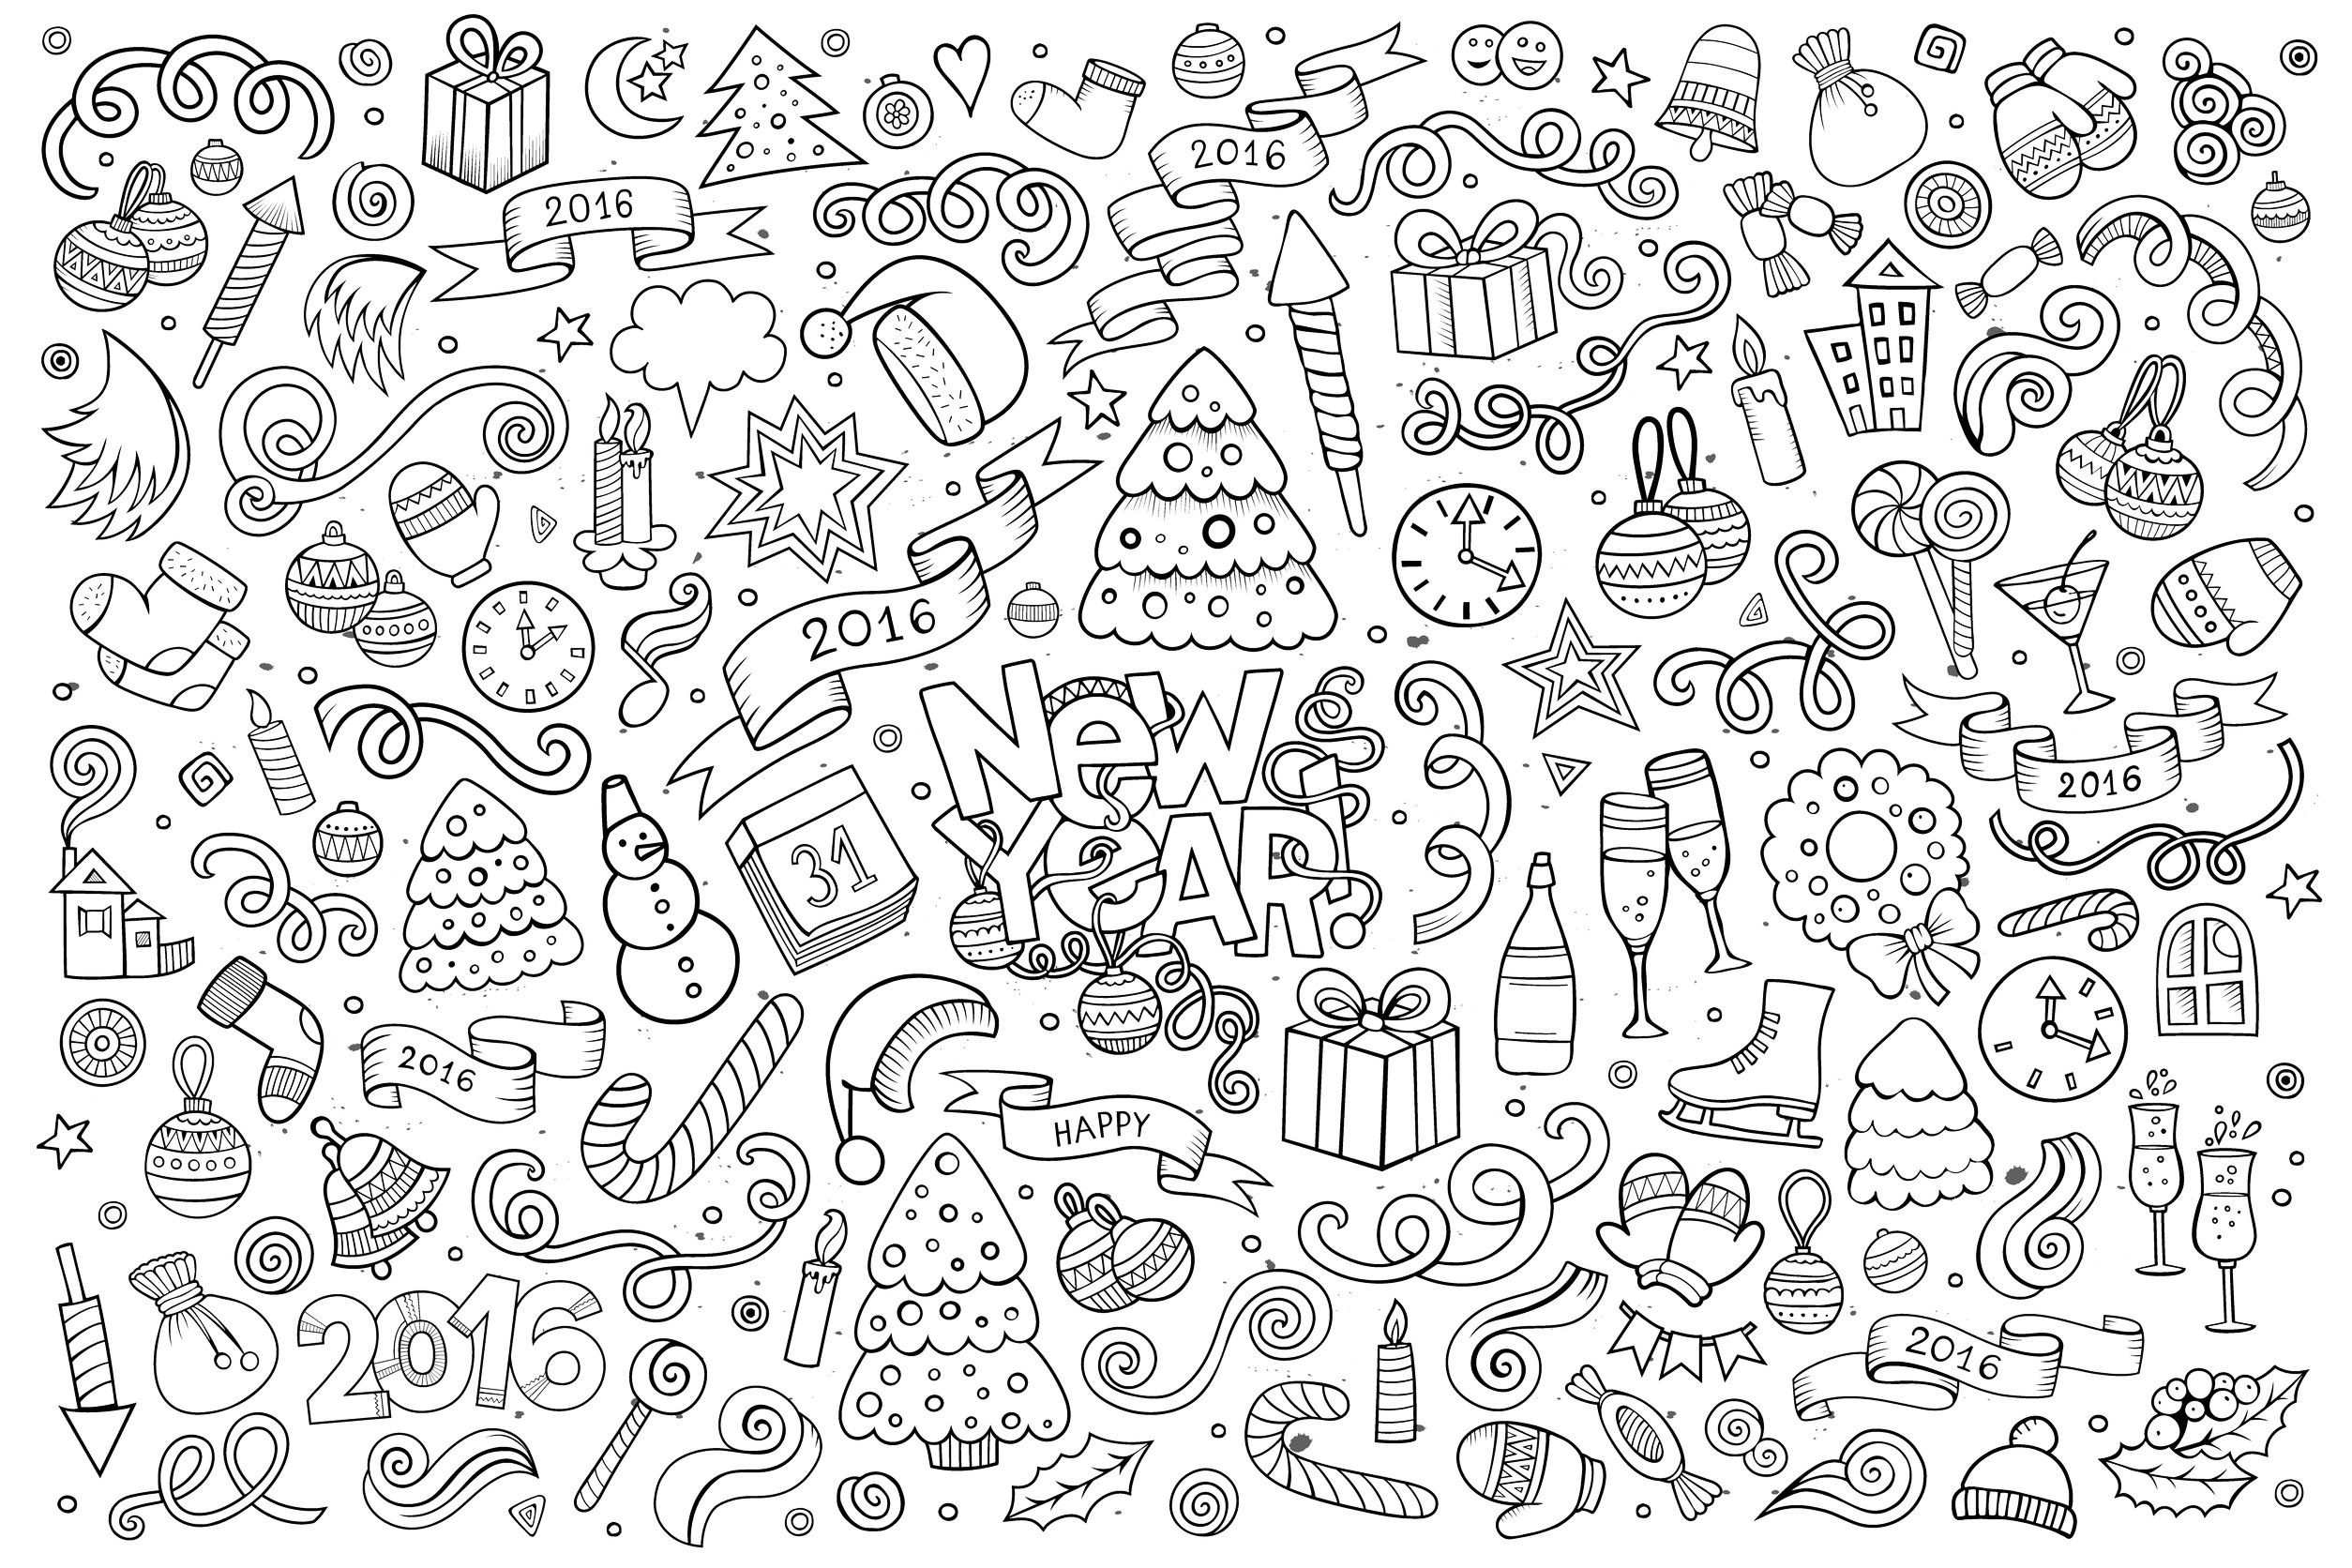 image=doodle art doodling coloring doodle happy new year 2016 by balabolka 1